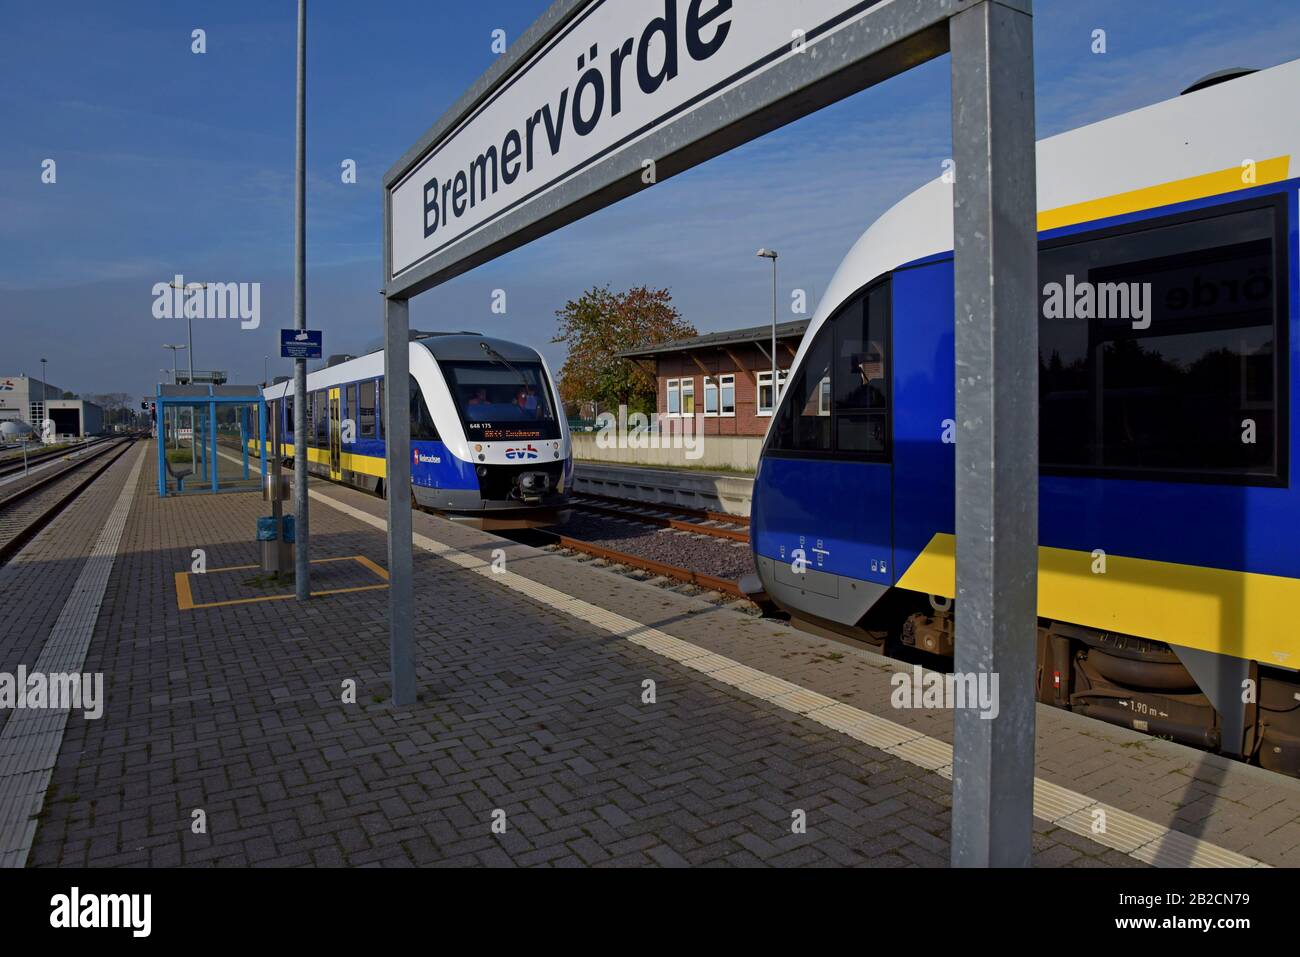 Coradia LINT 41 built by Alstom, operated by EVB at Bremervorde station, Germany Stock Photo